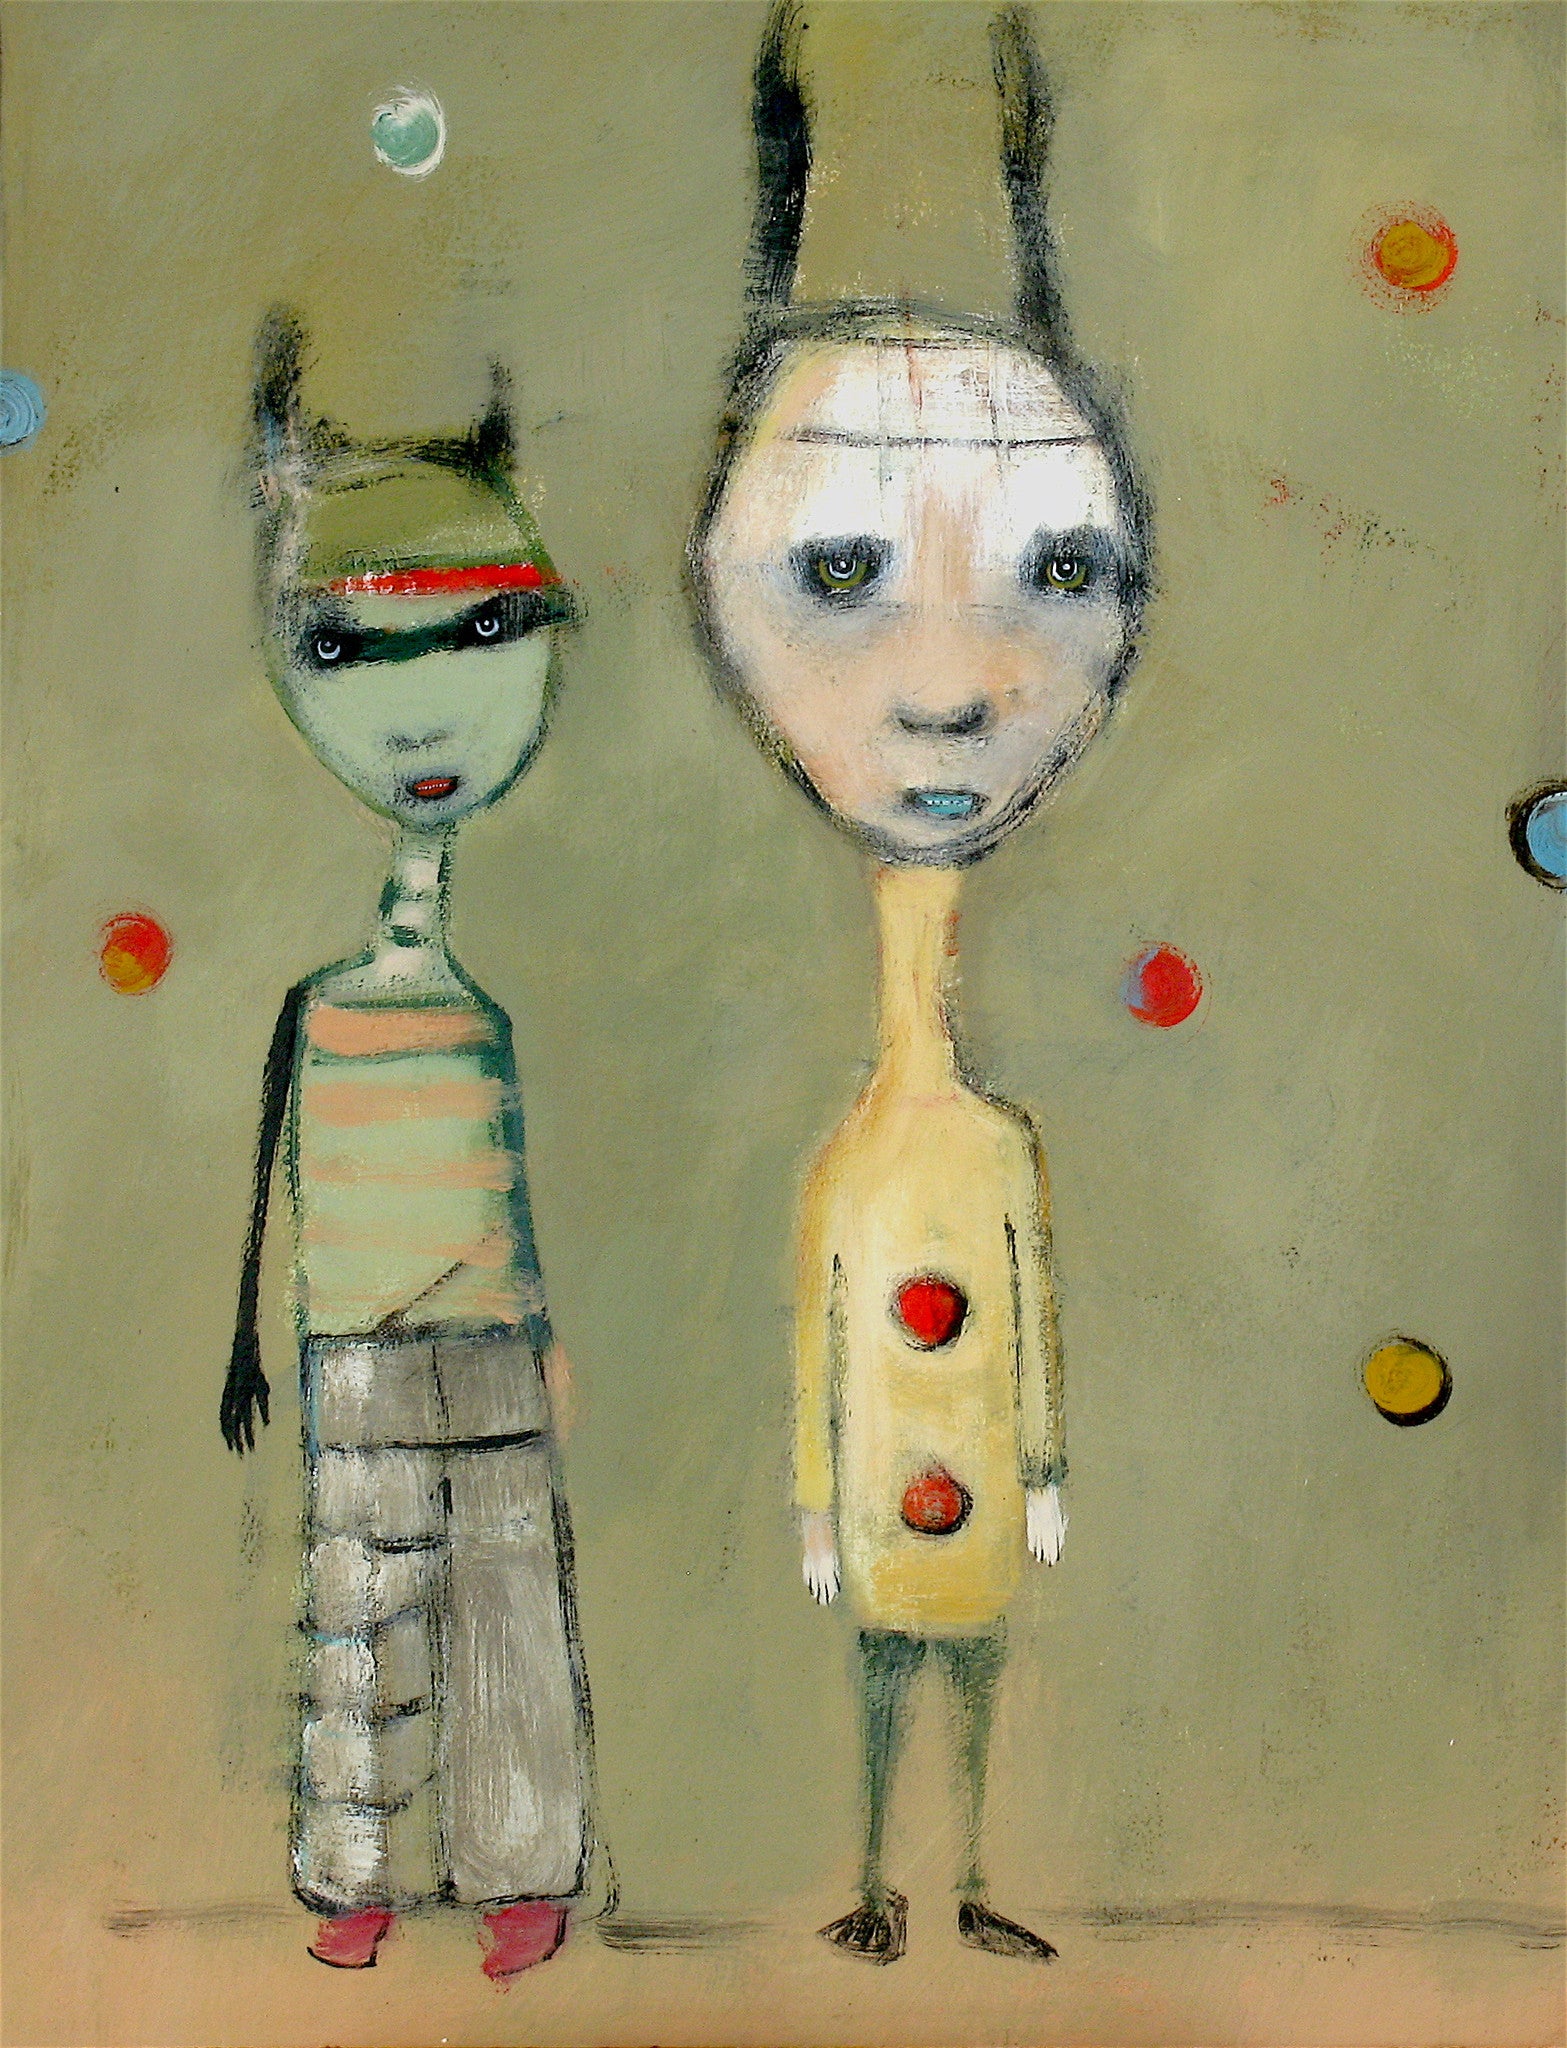 SOLD "Unlikely Couple" original painting by Jacquline Hurlbert